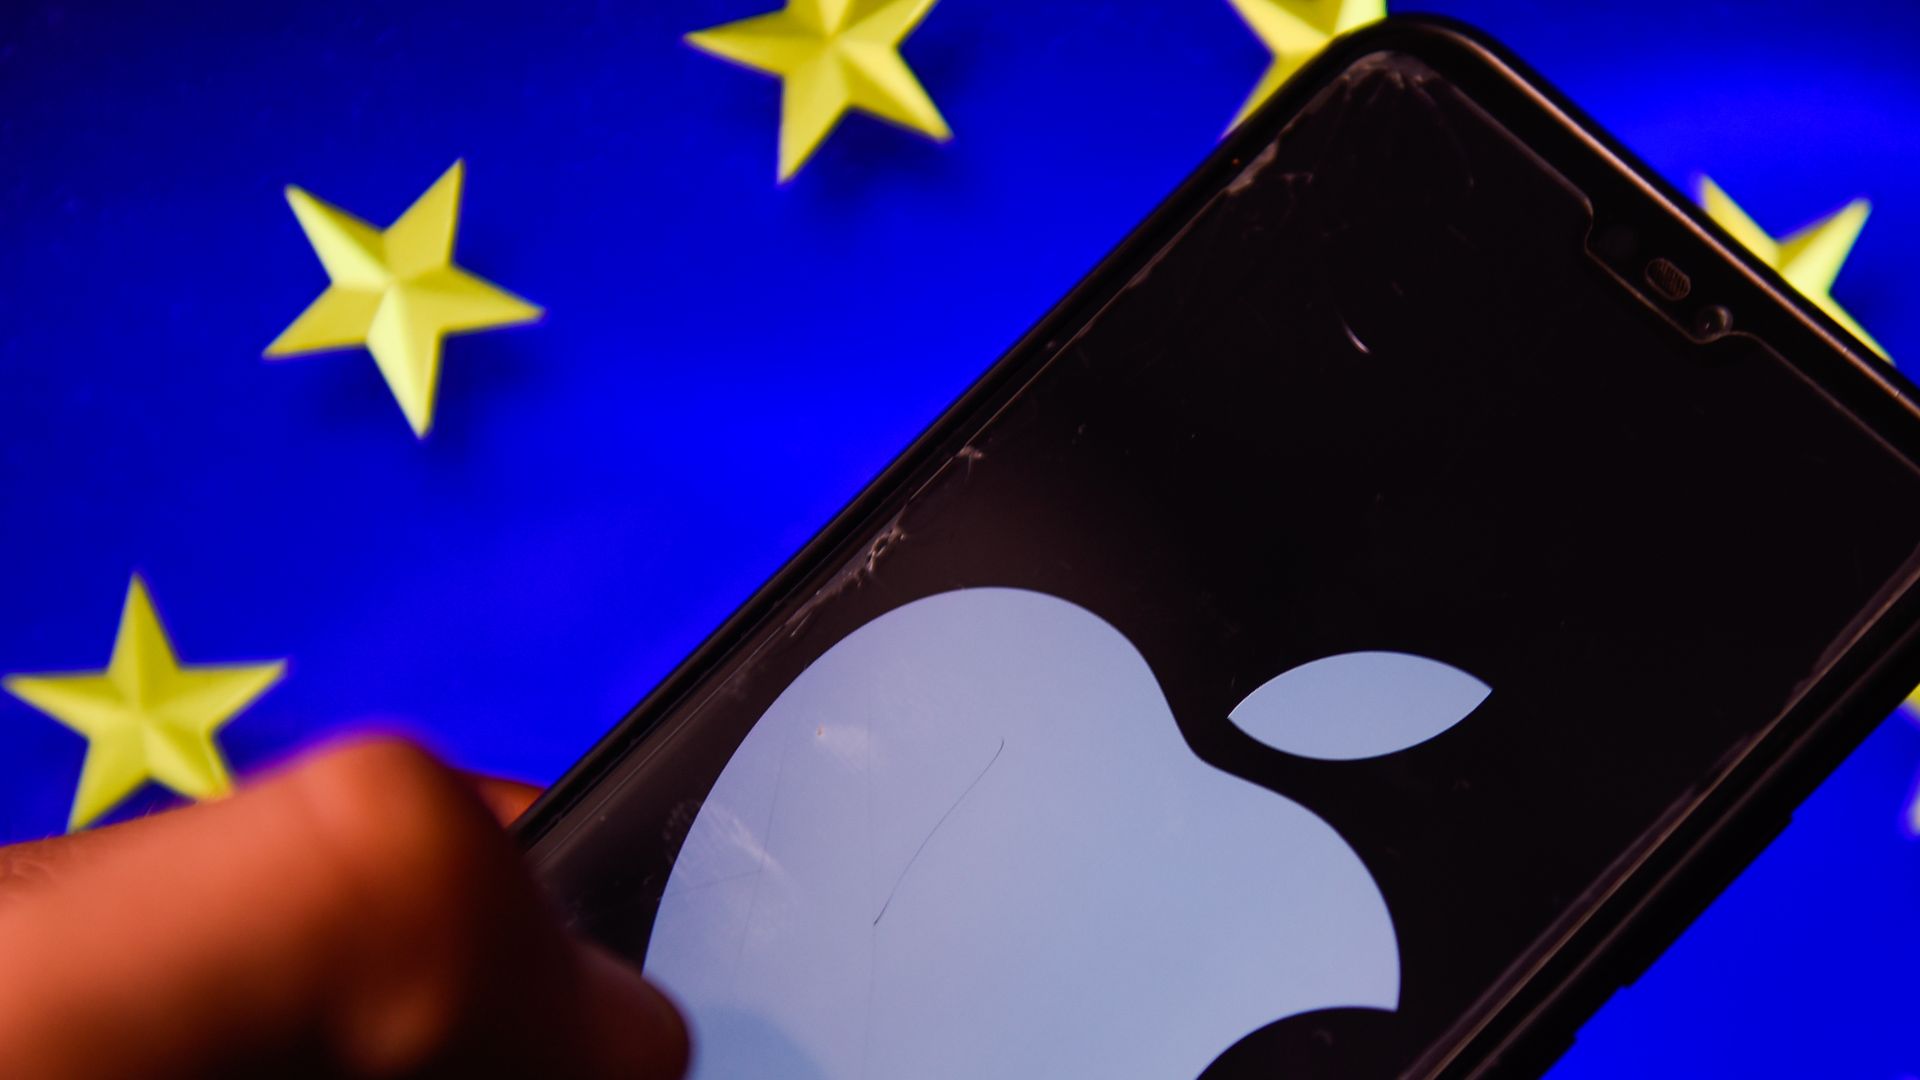 A photo illustration of a smartphone with the Apple logo displayed prominently on the screen, with a European Union flag in the background.